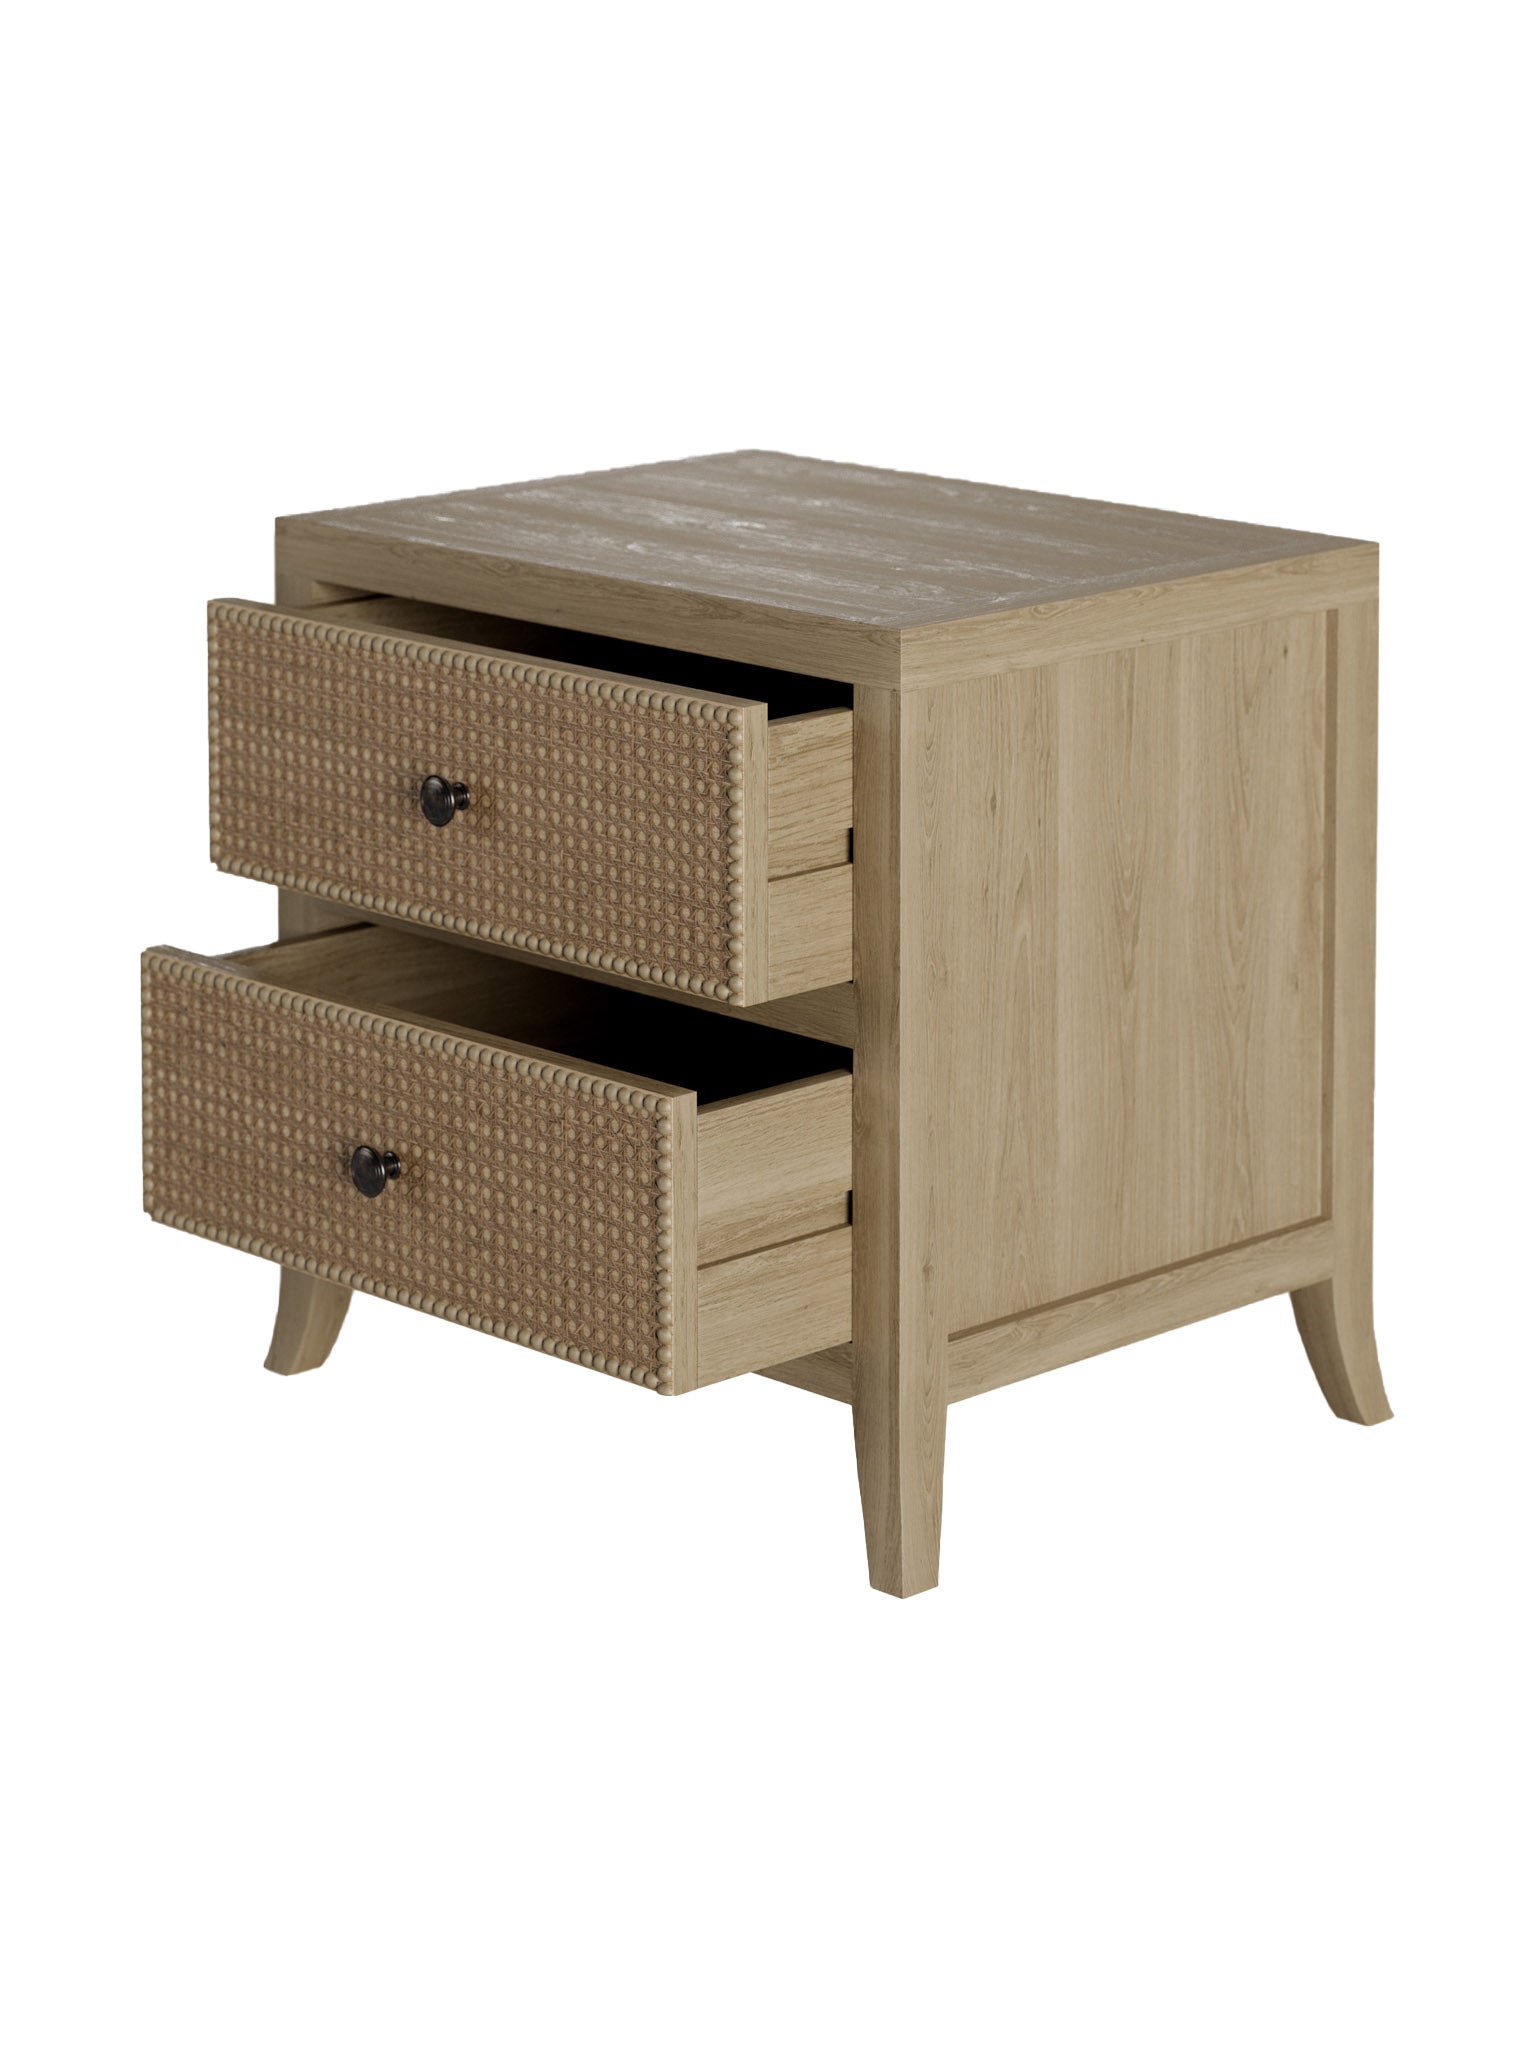 Oak and rattan laticed front 2 drawer bedside table